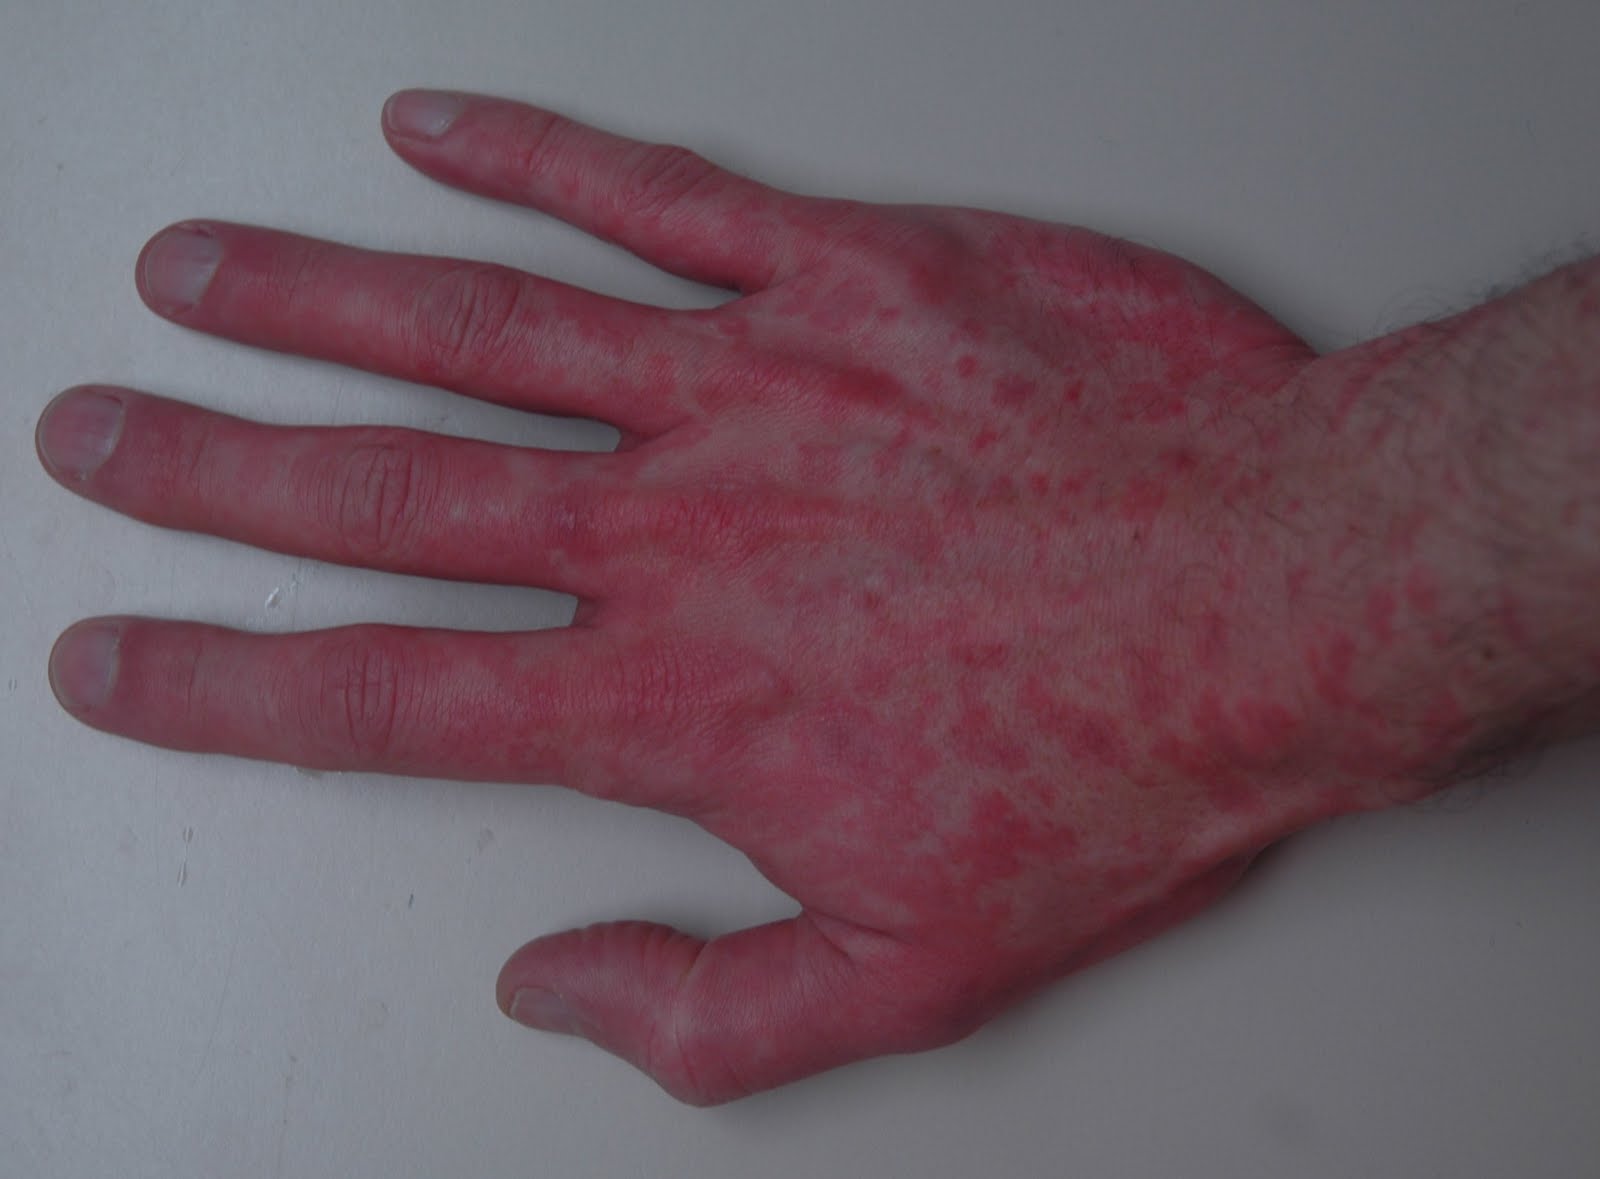 What causes reddened hands? | Reference.com